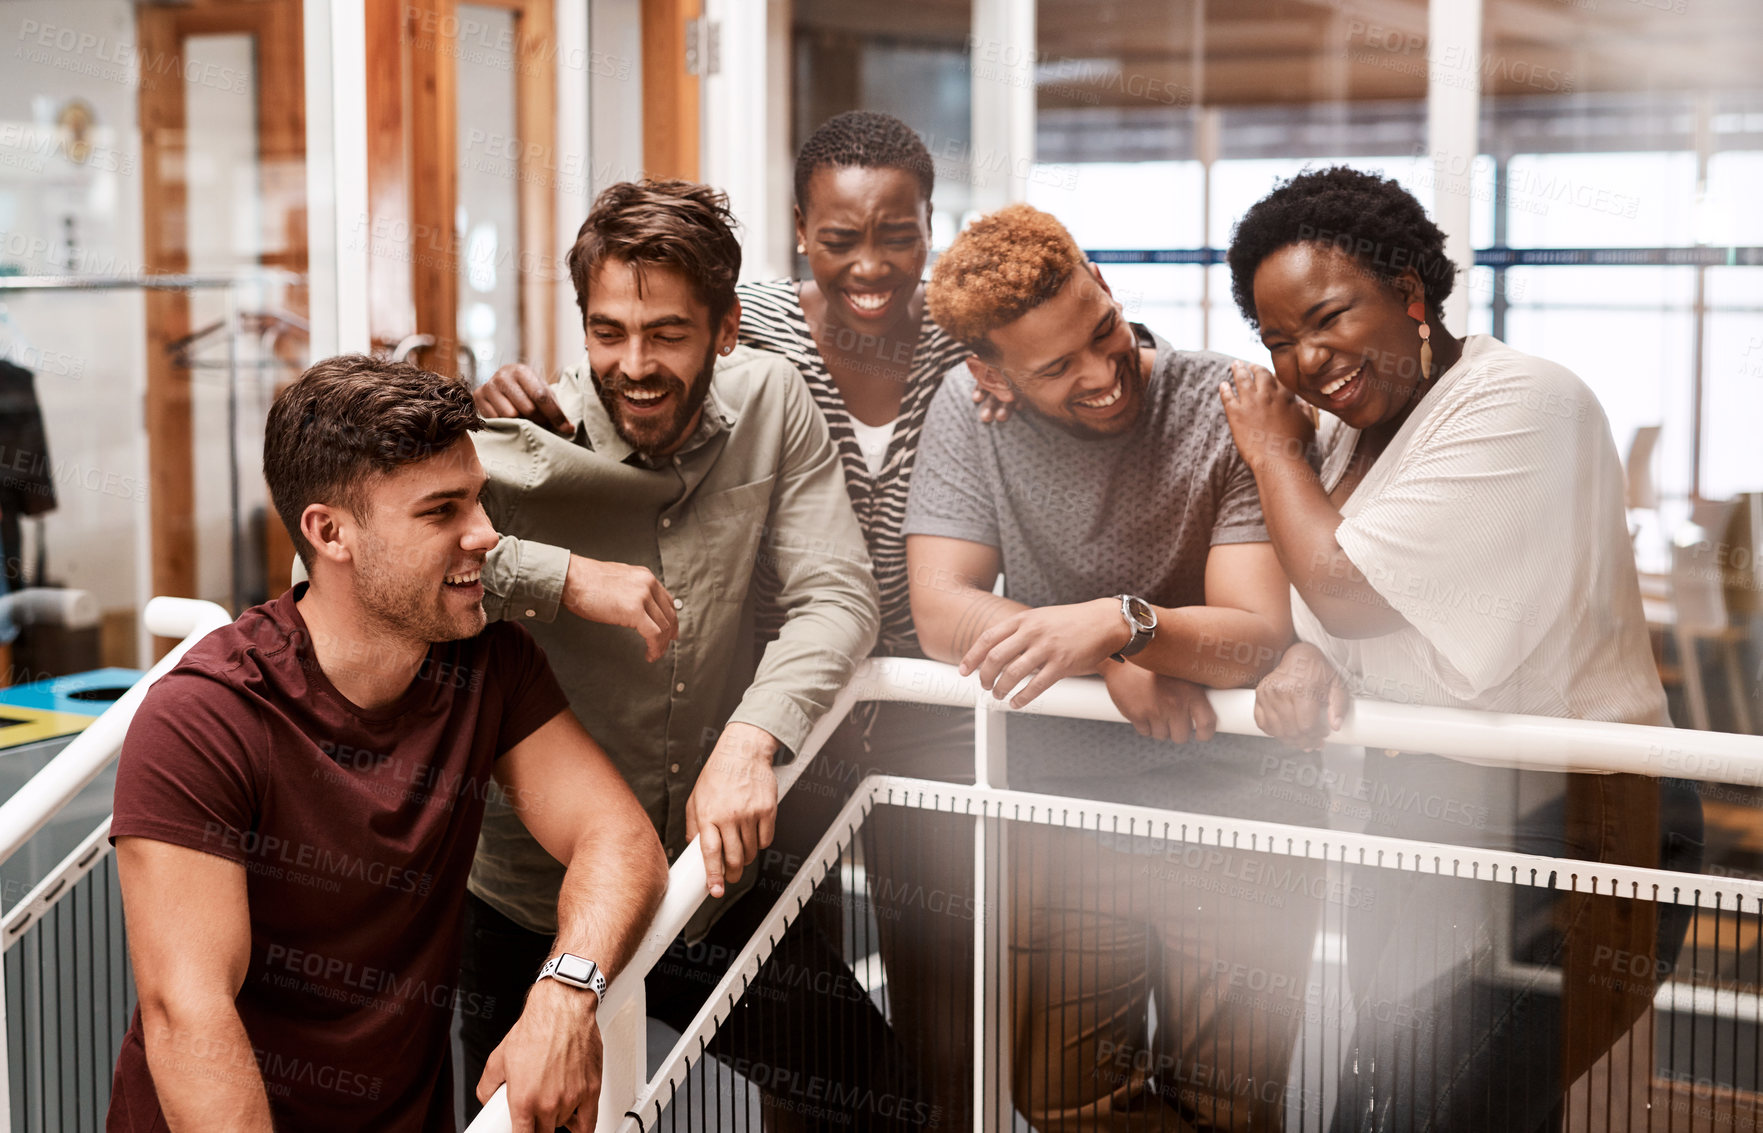 Buy stock photo Shot of a group of young creatives in an office